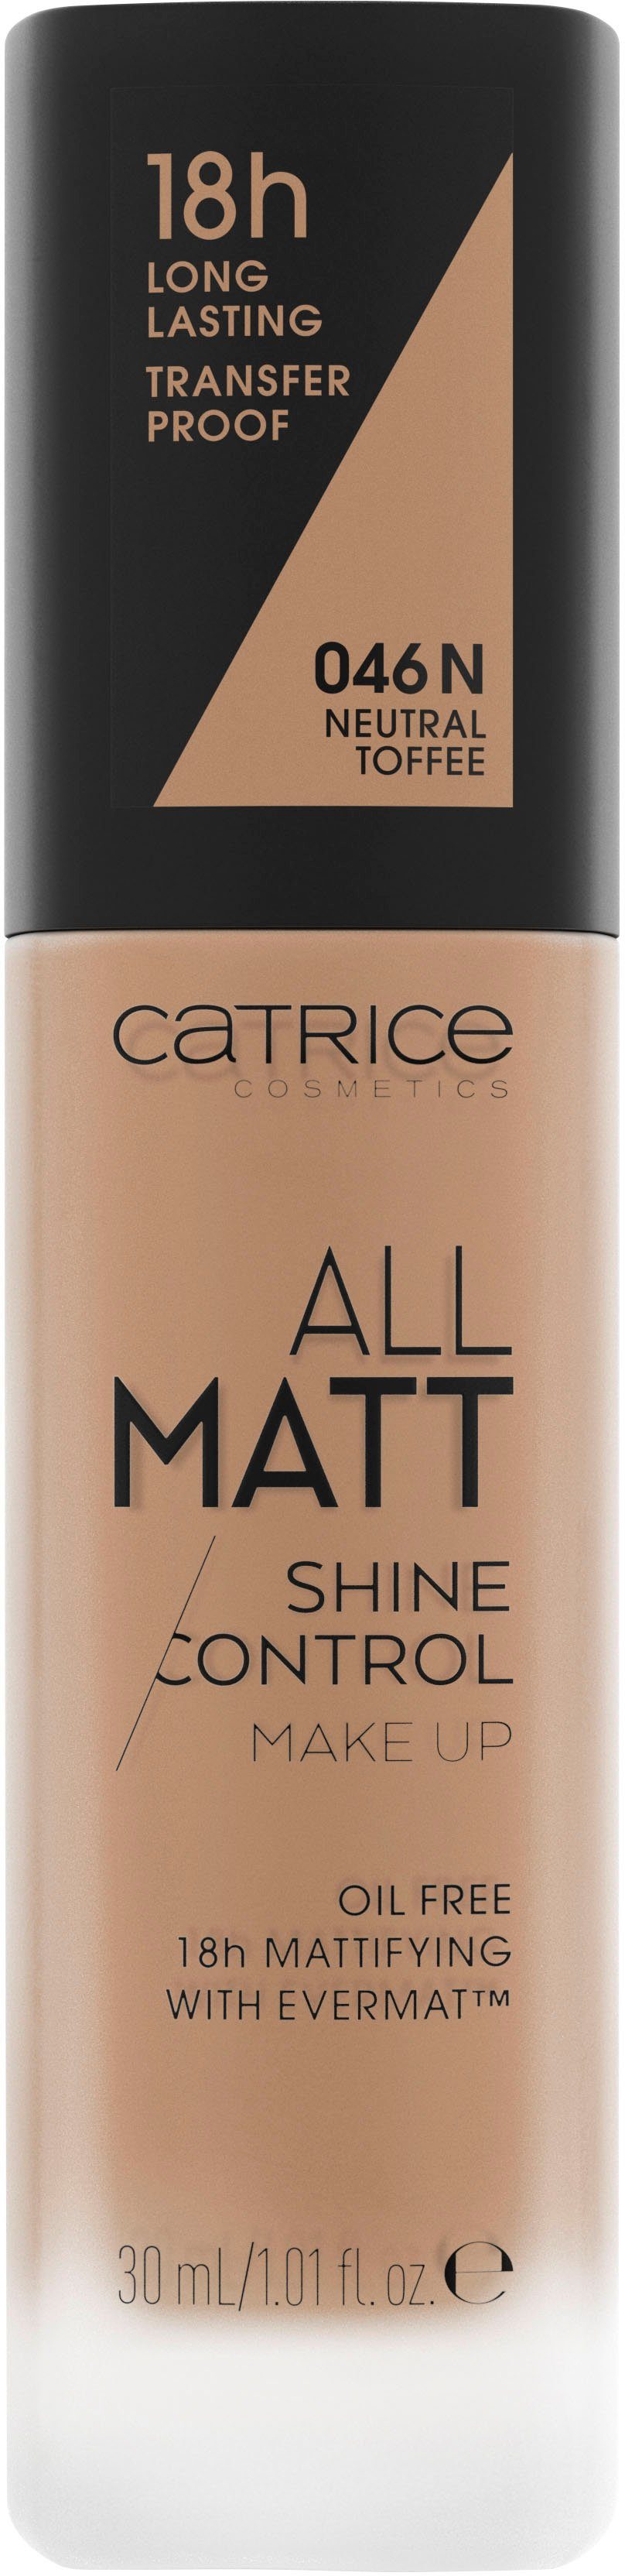 Catrice Foundation Control Make Toffee All Neutral Shine Matt Up